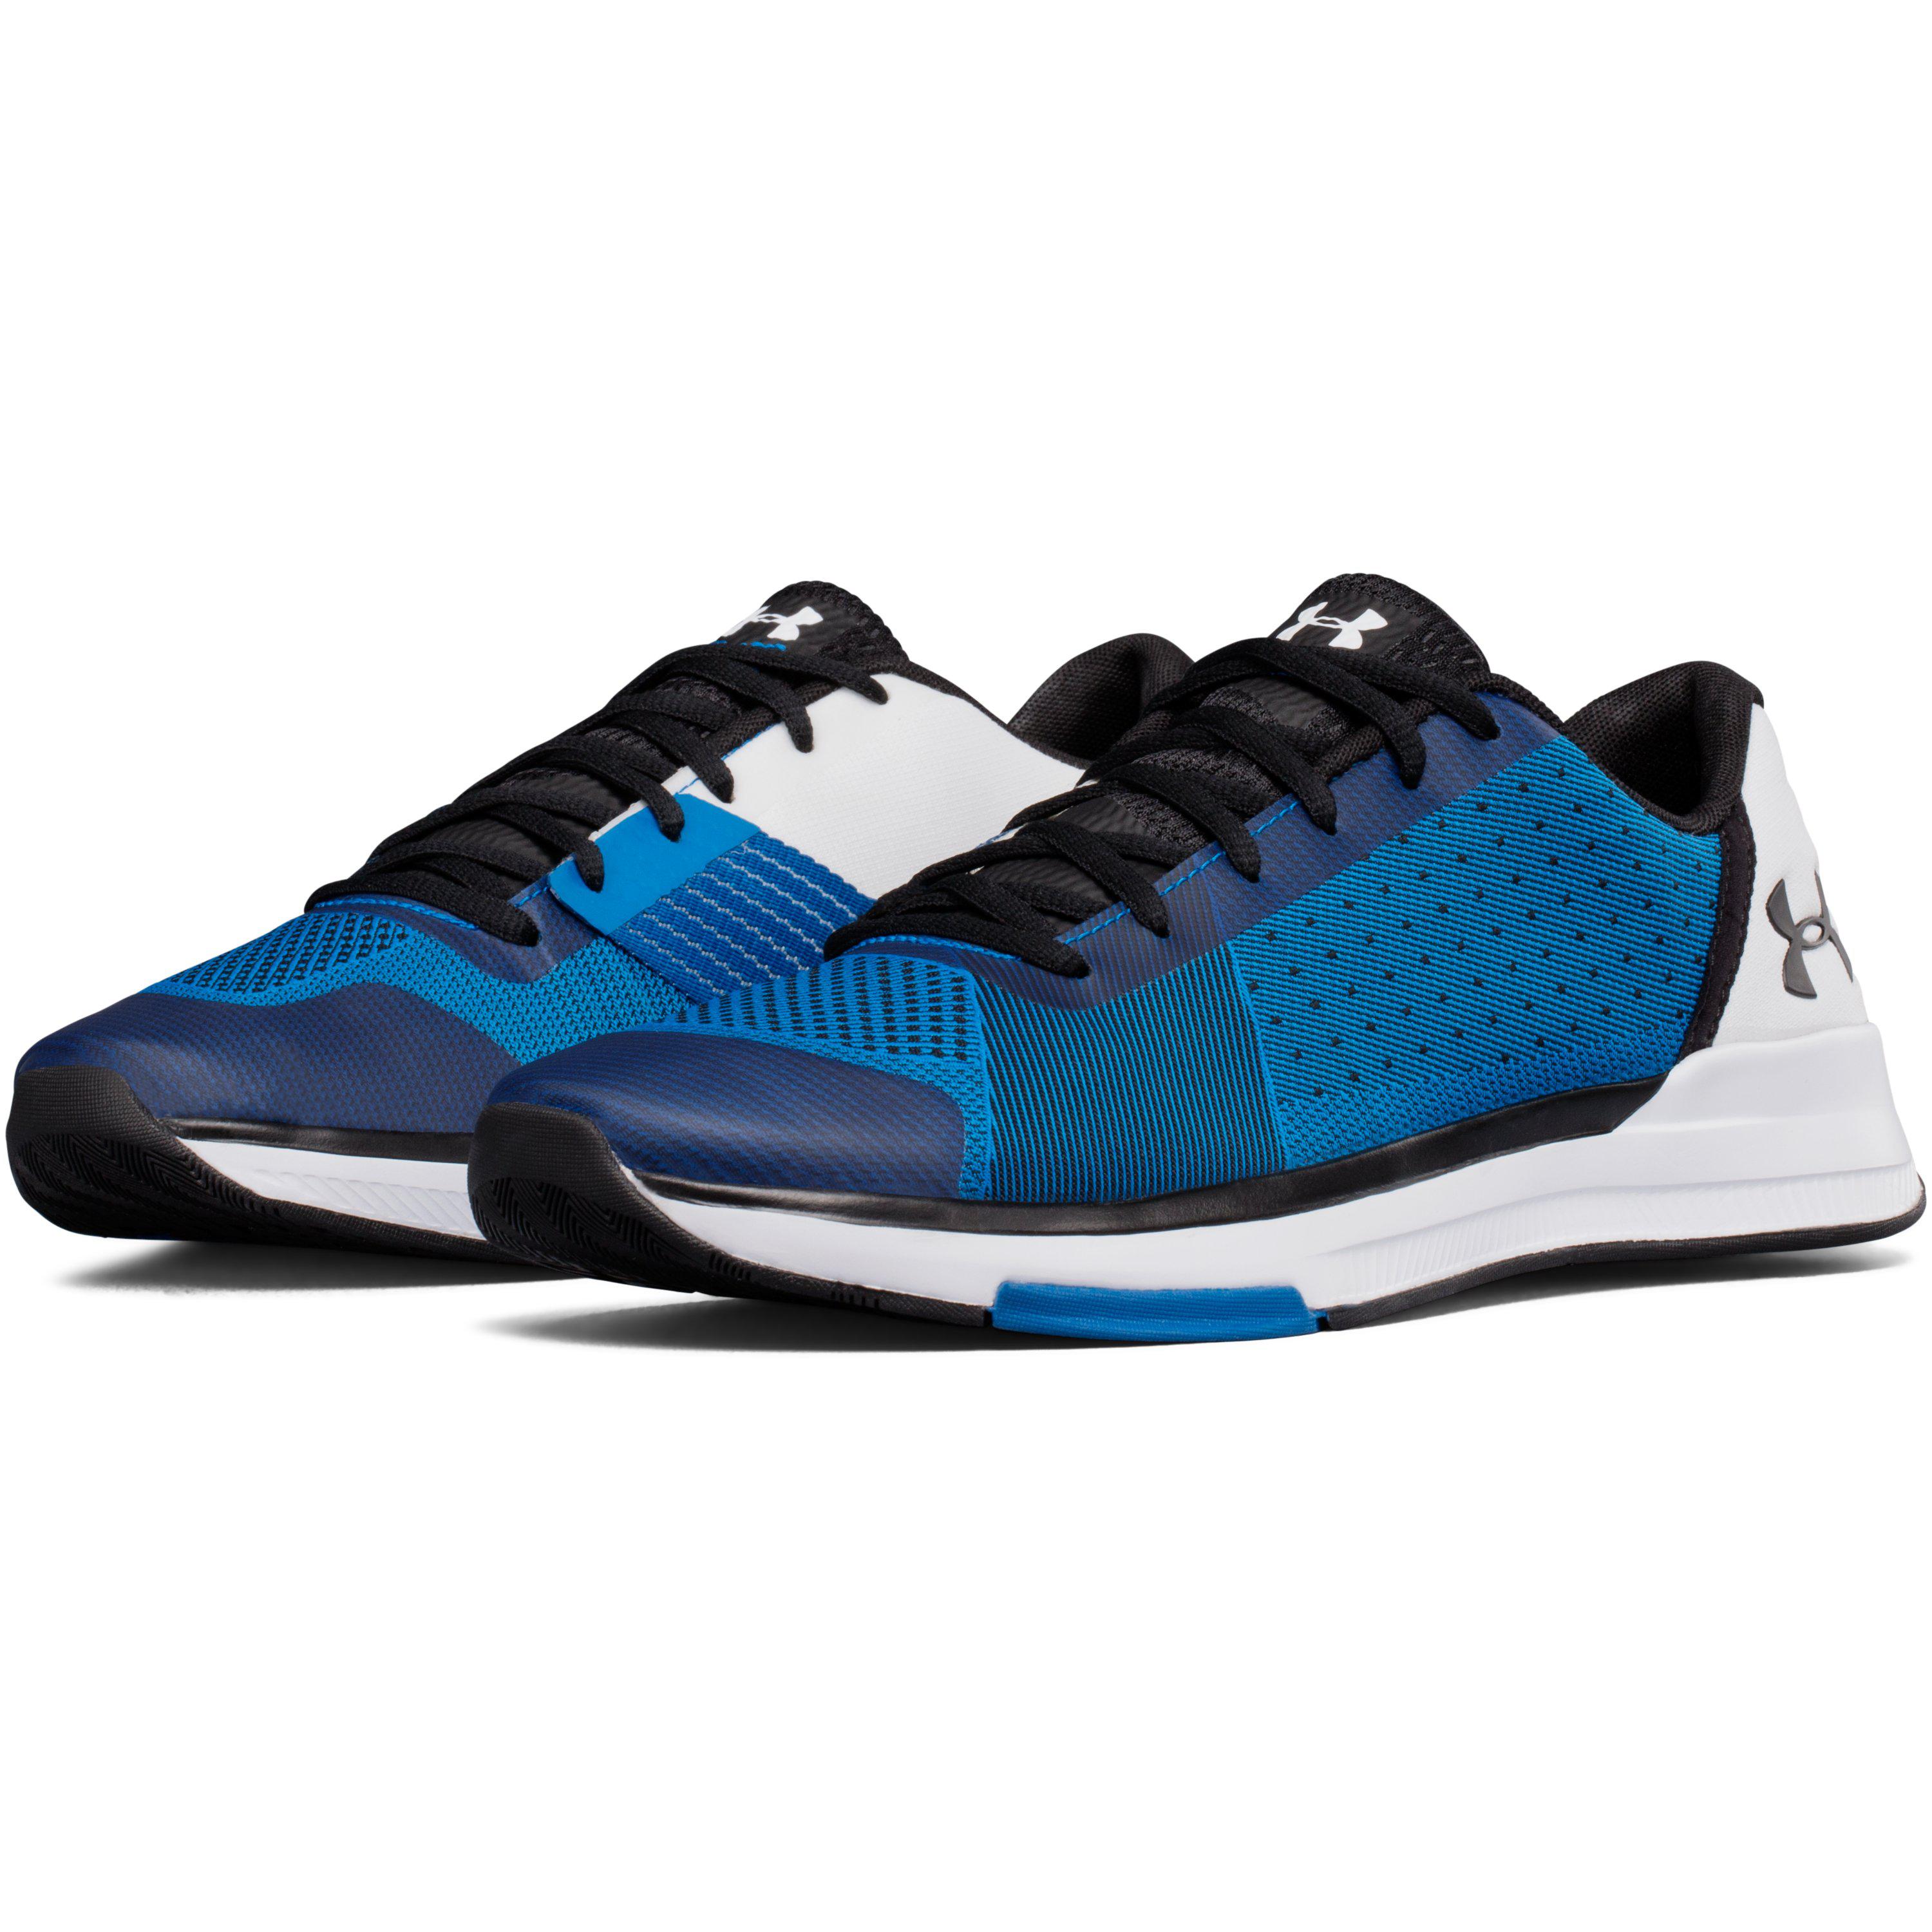 Under Armour Rubber Men's Ua Showstopper Training Shoes in Blue for Men